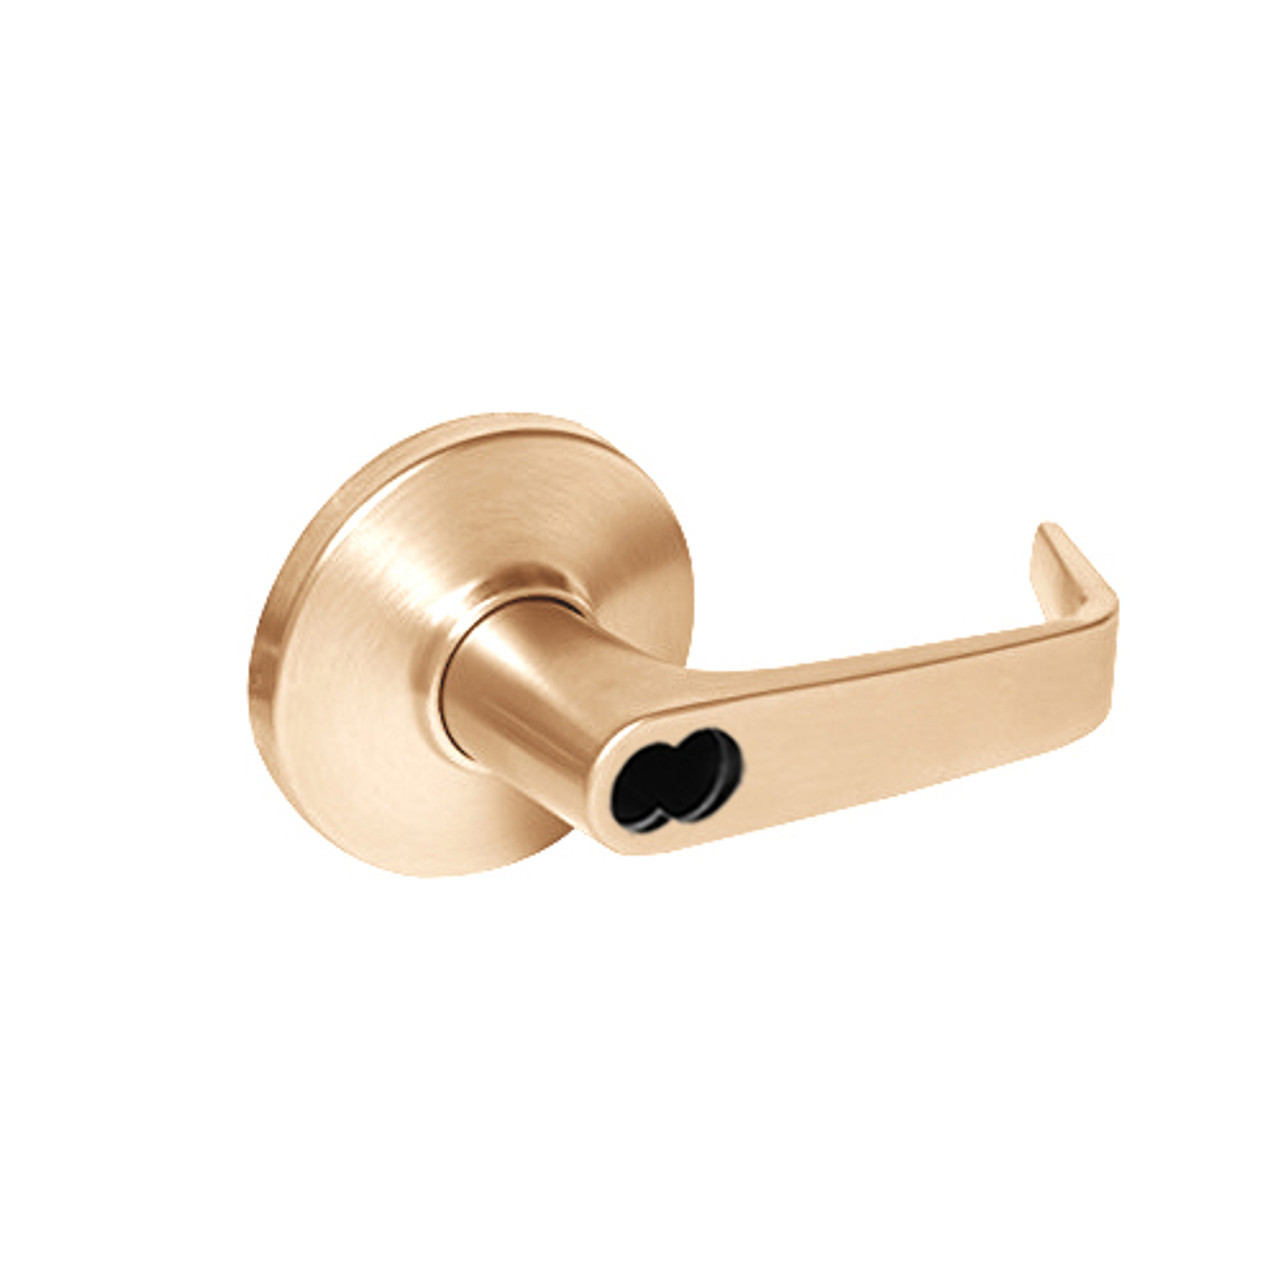 9K37T15DSTK611LM Best 9K Series Dormitory Cylindrical Lever Locks with Contour Angle with Return Lever Design Accept 7 Pin Best Core in Bright Bronze